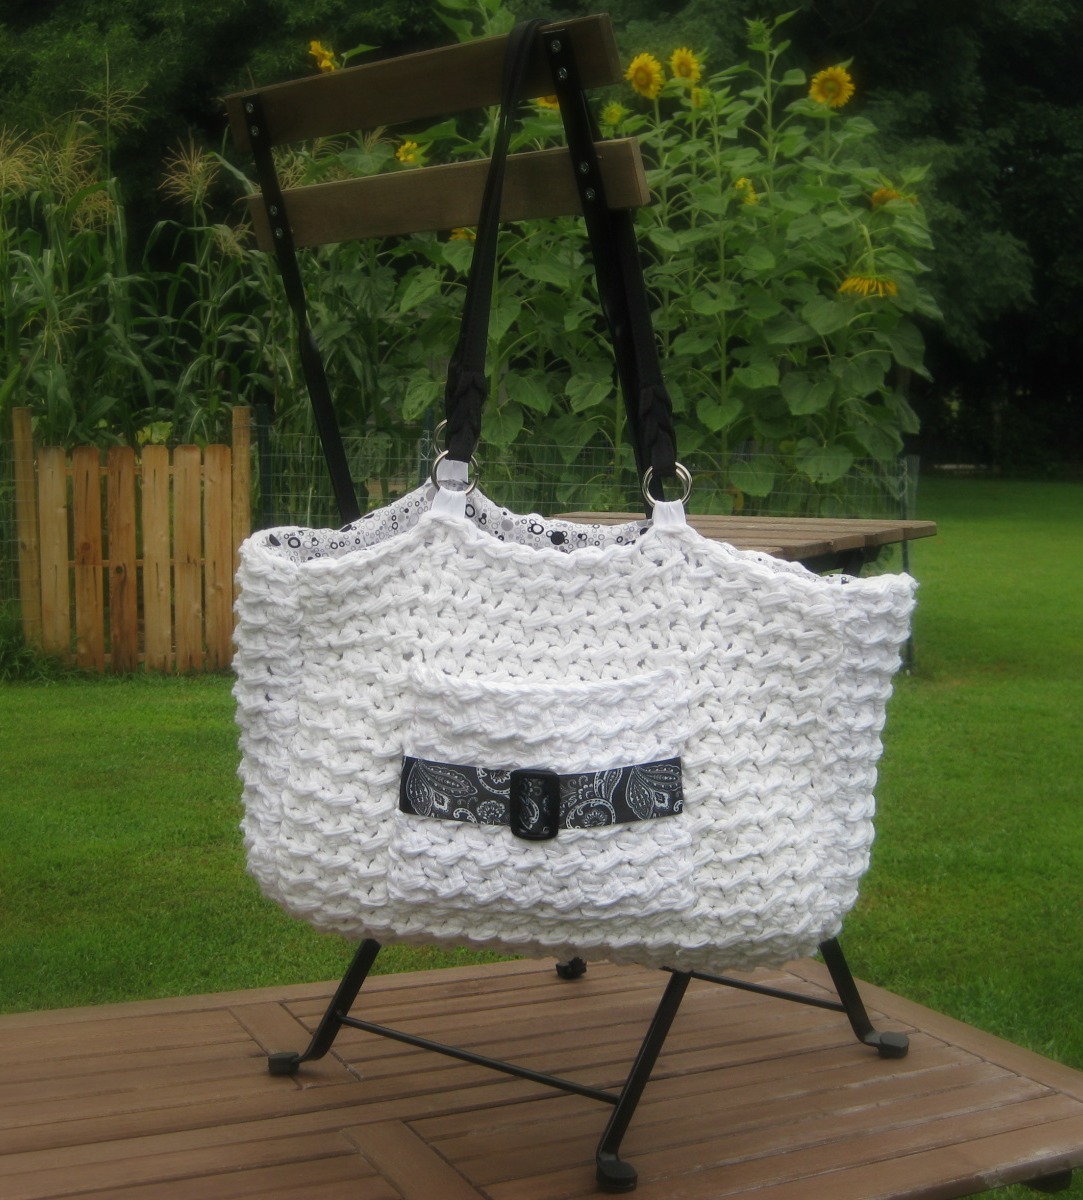 Large Buckle Tote